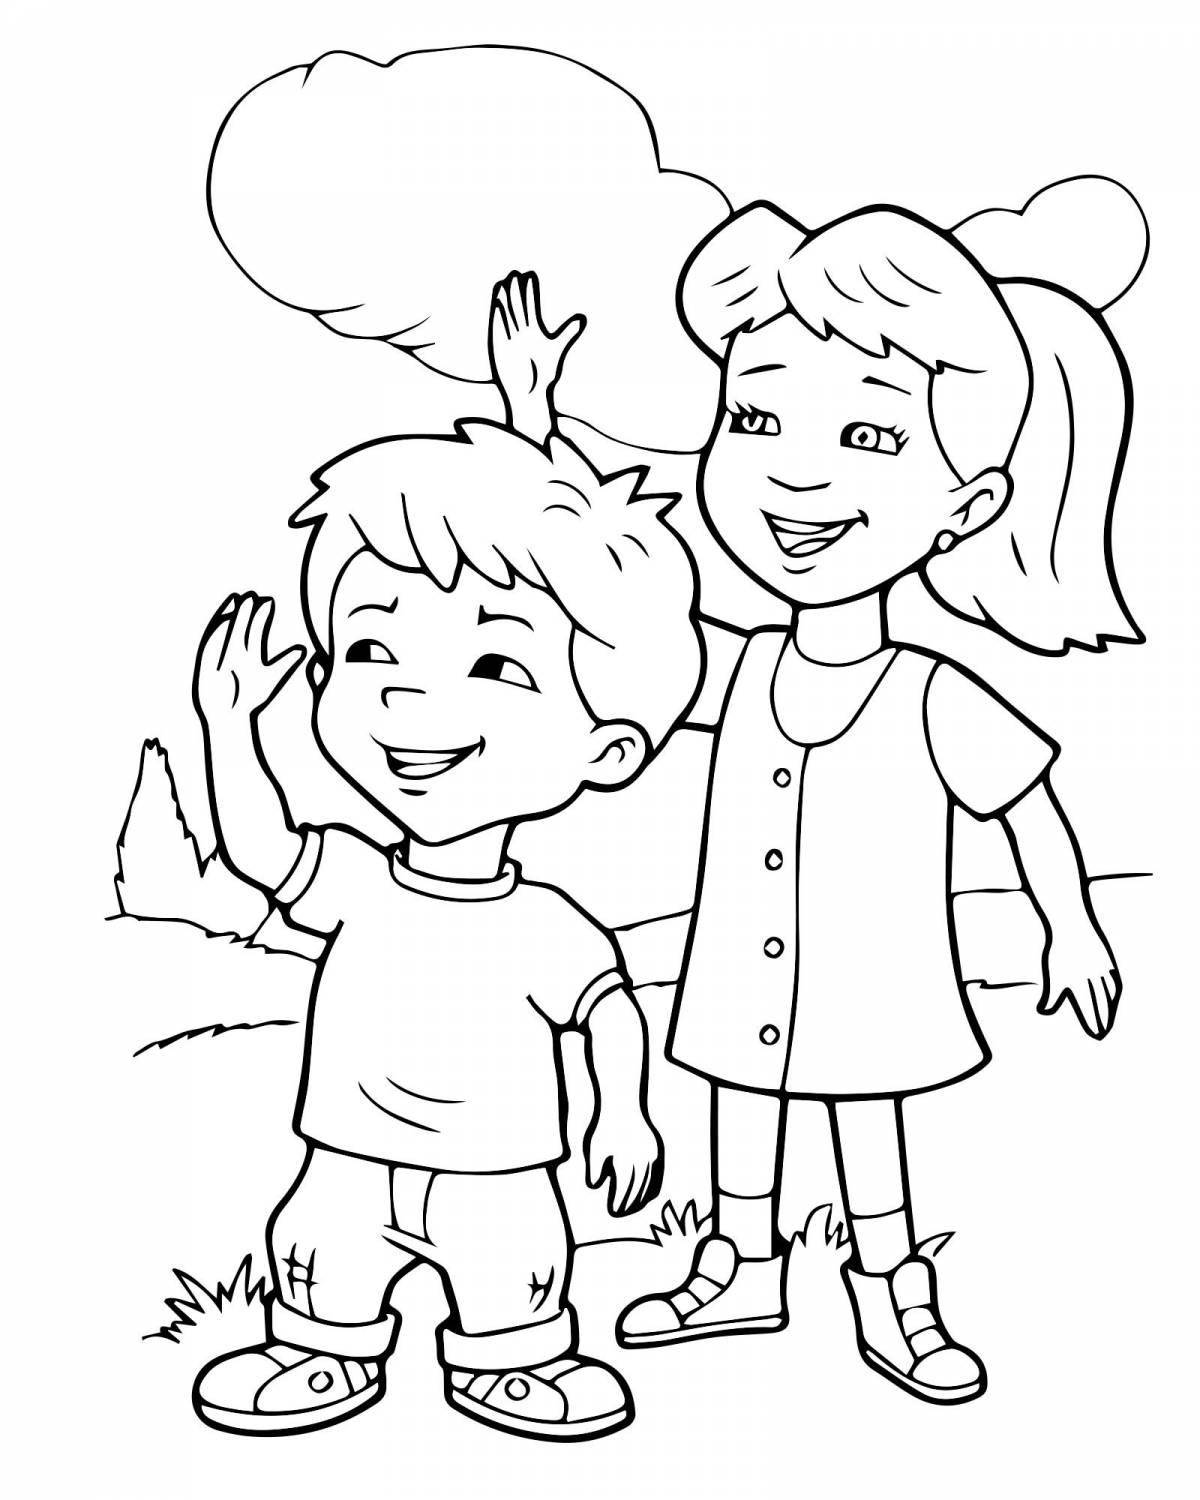 Awesome hello coloring page